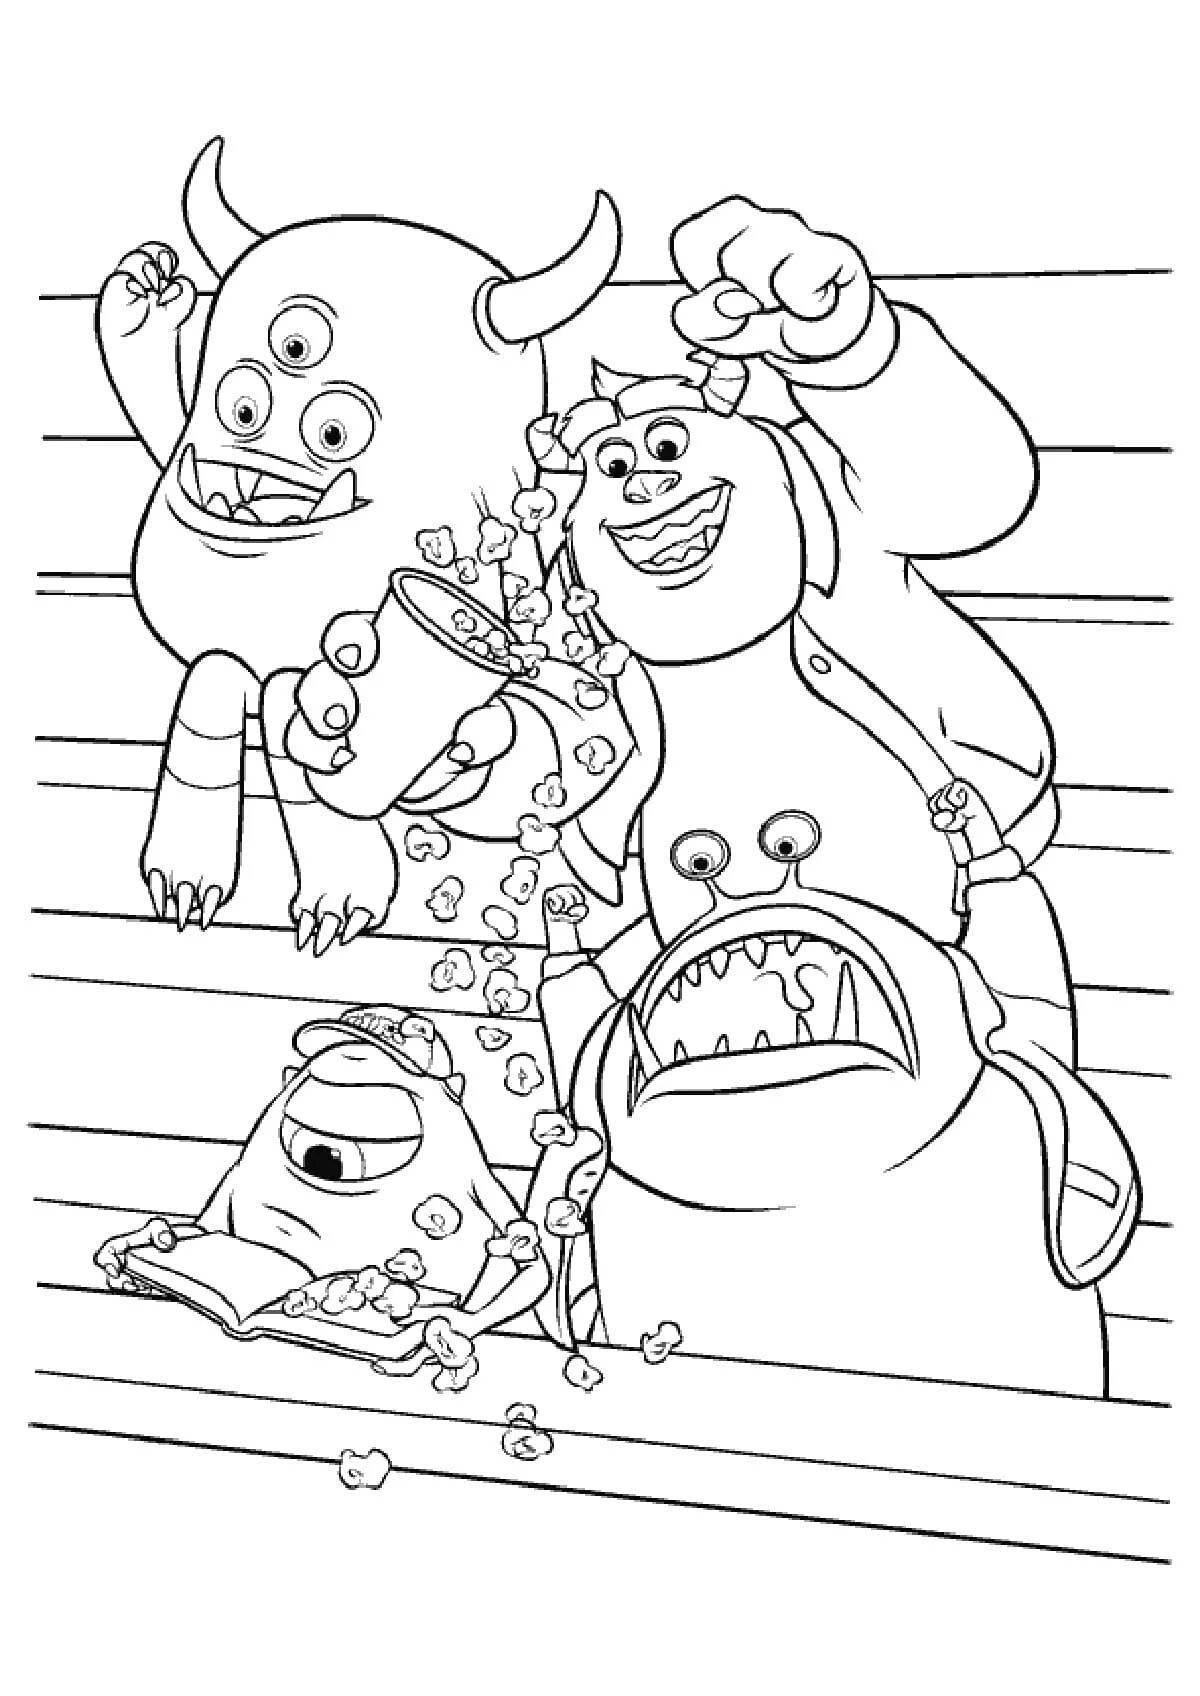 Glorious Monsters University coloring page